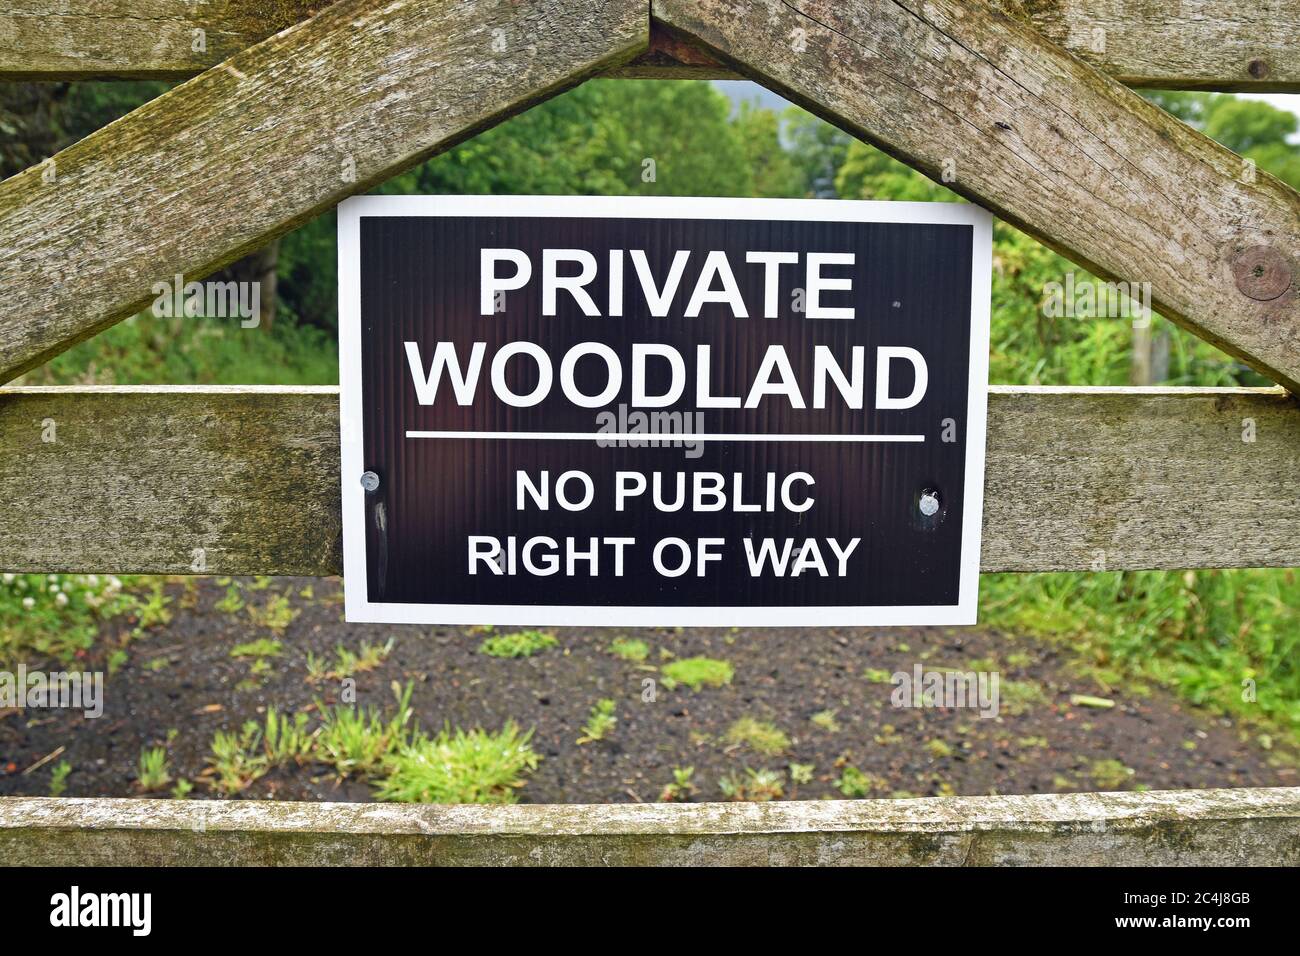 Sign for private woodland no public right of way in Scotland. This is not enforceable due to the right to roam in Scotland. Stock Photo